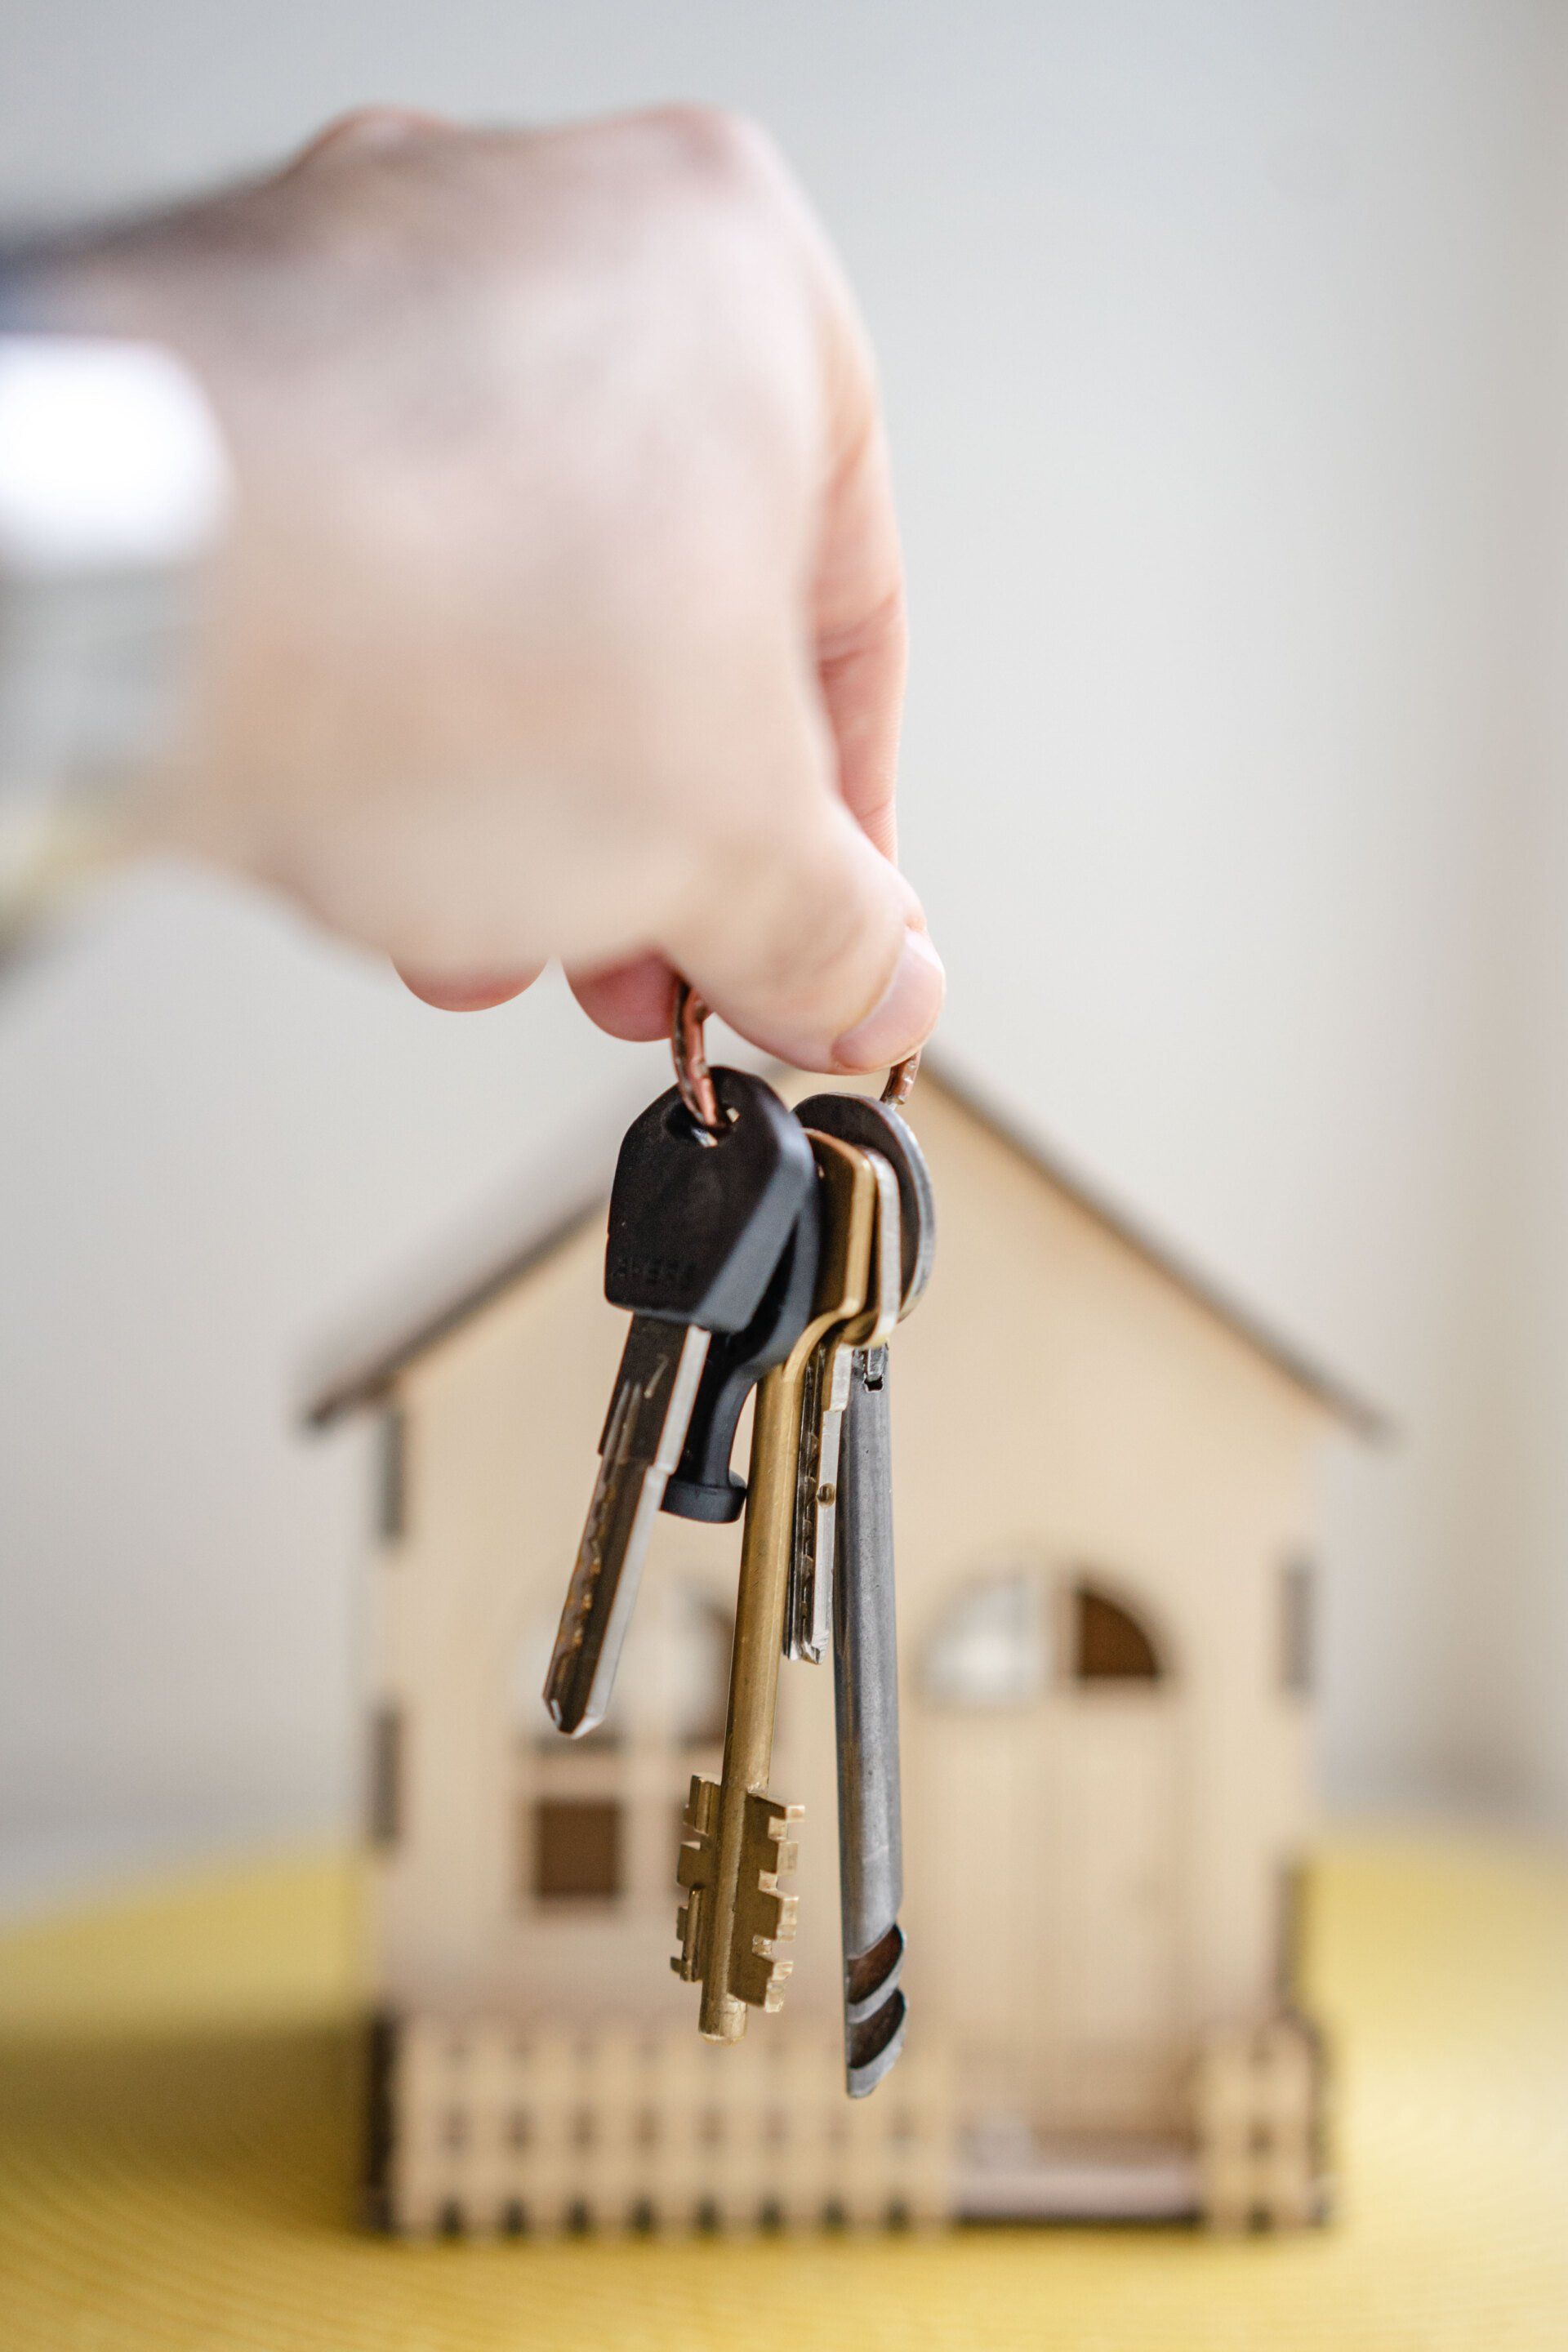 a picture of a hand holding keys in front of a model house